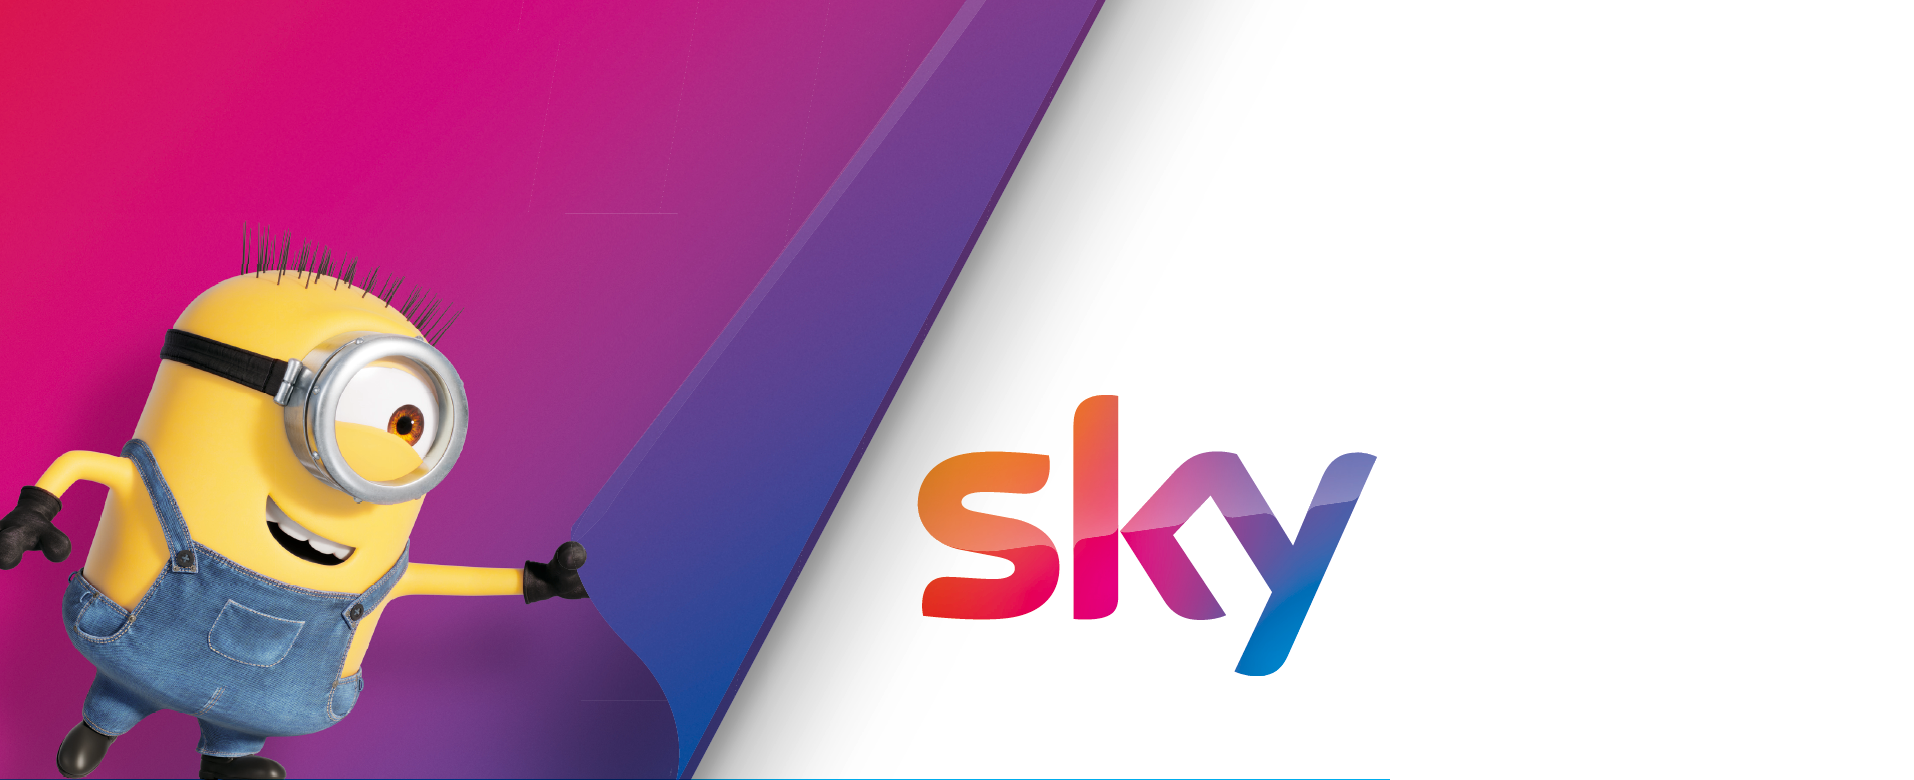 Sky’s first ever store in Ireland NOW OPEN in Blanchardstown Centre